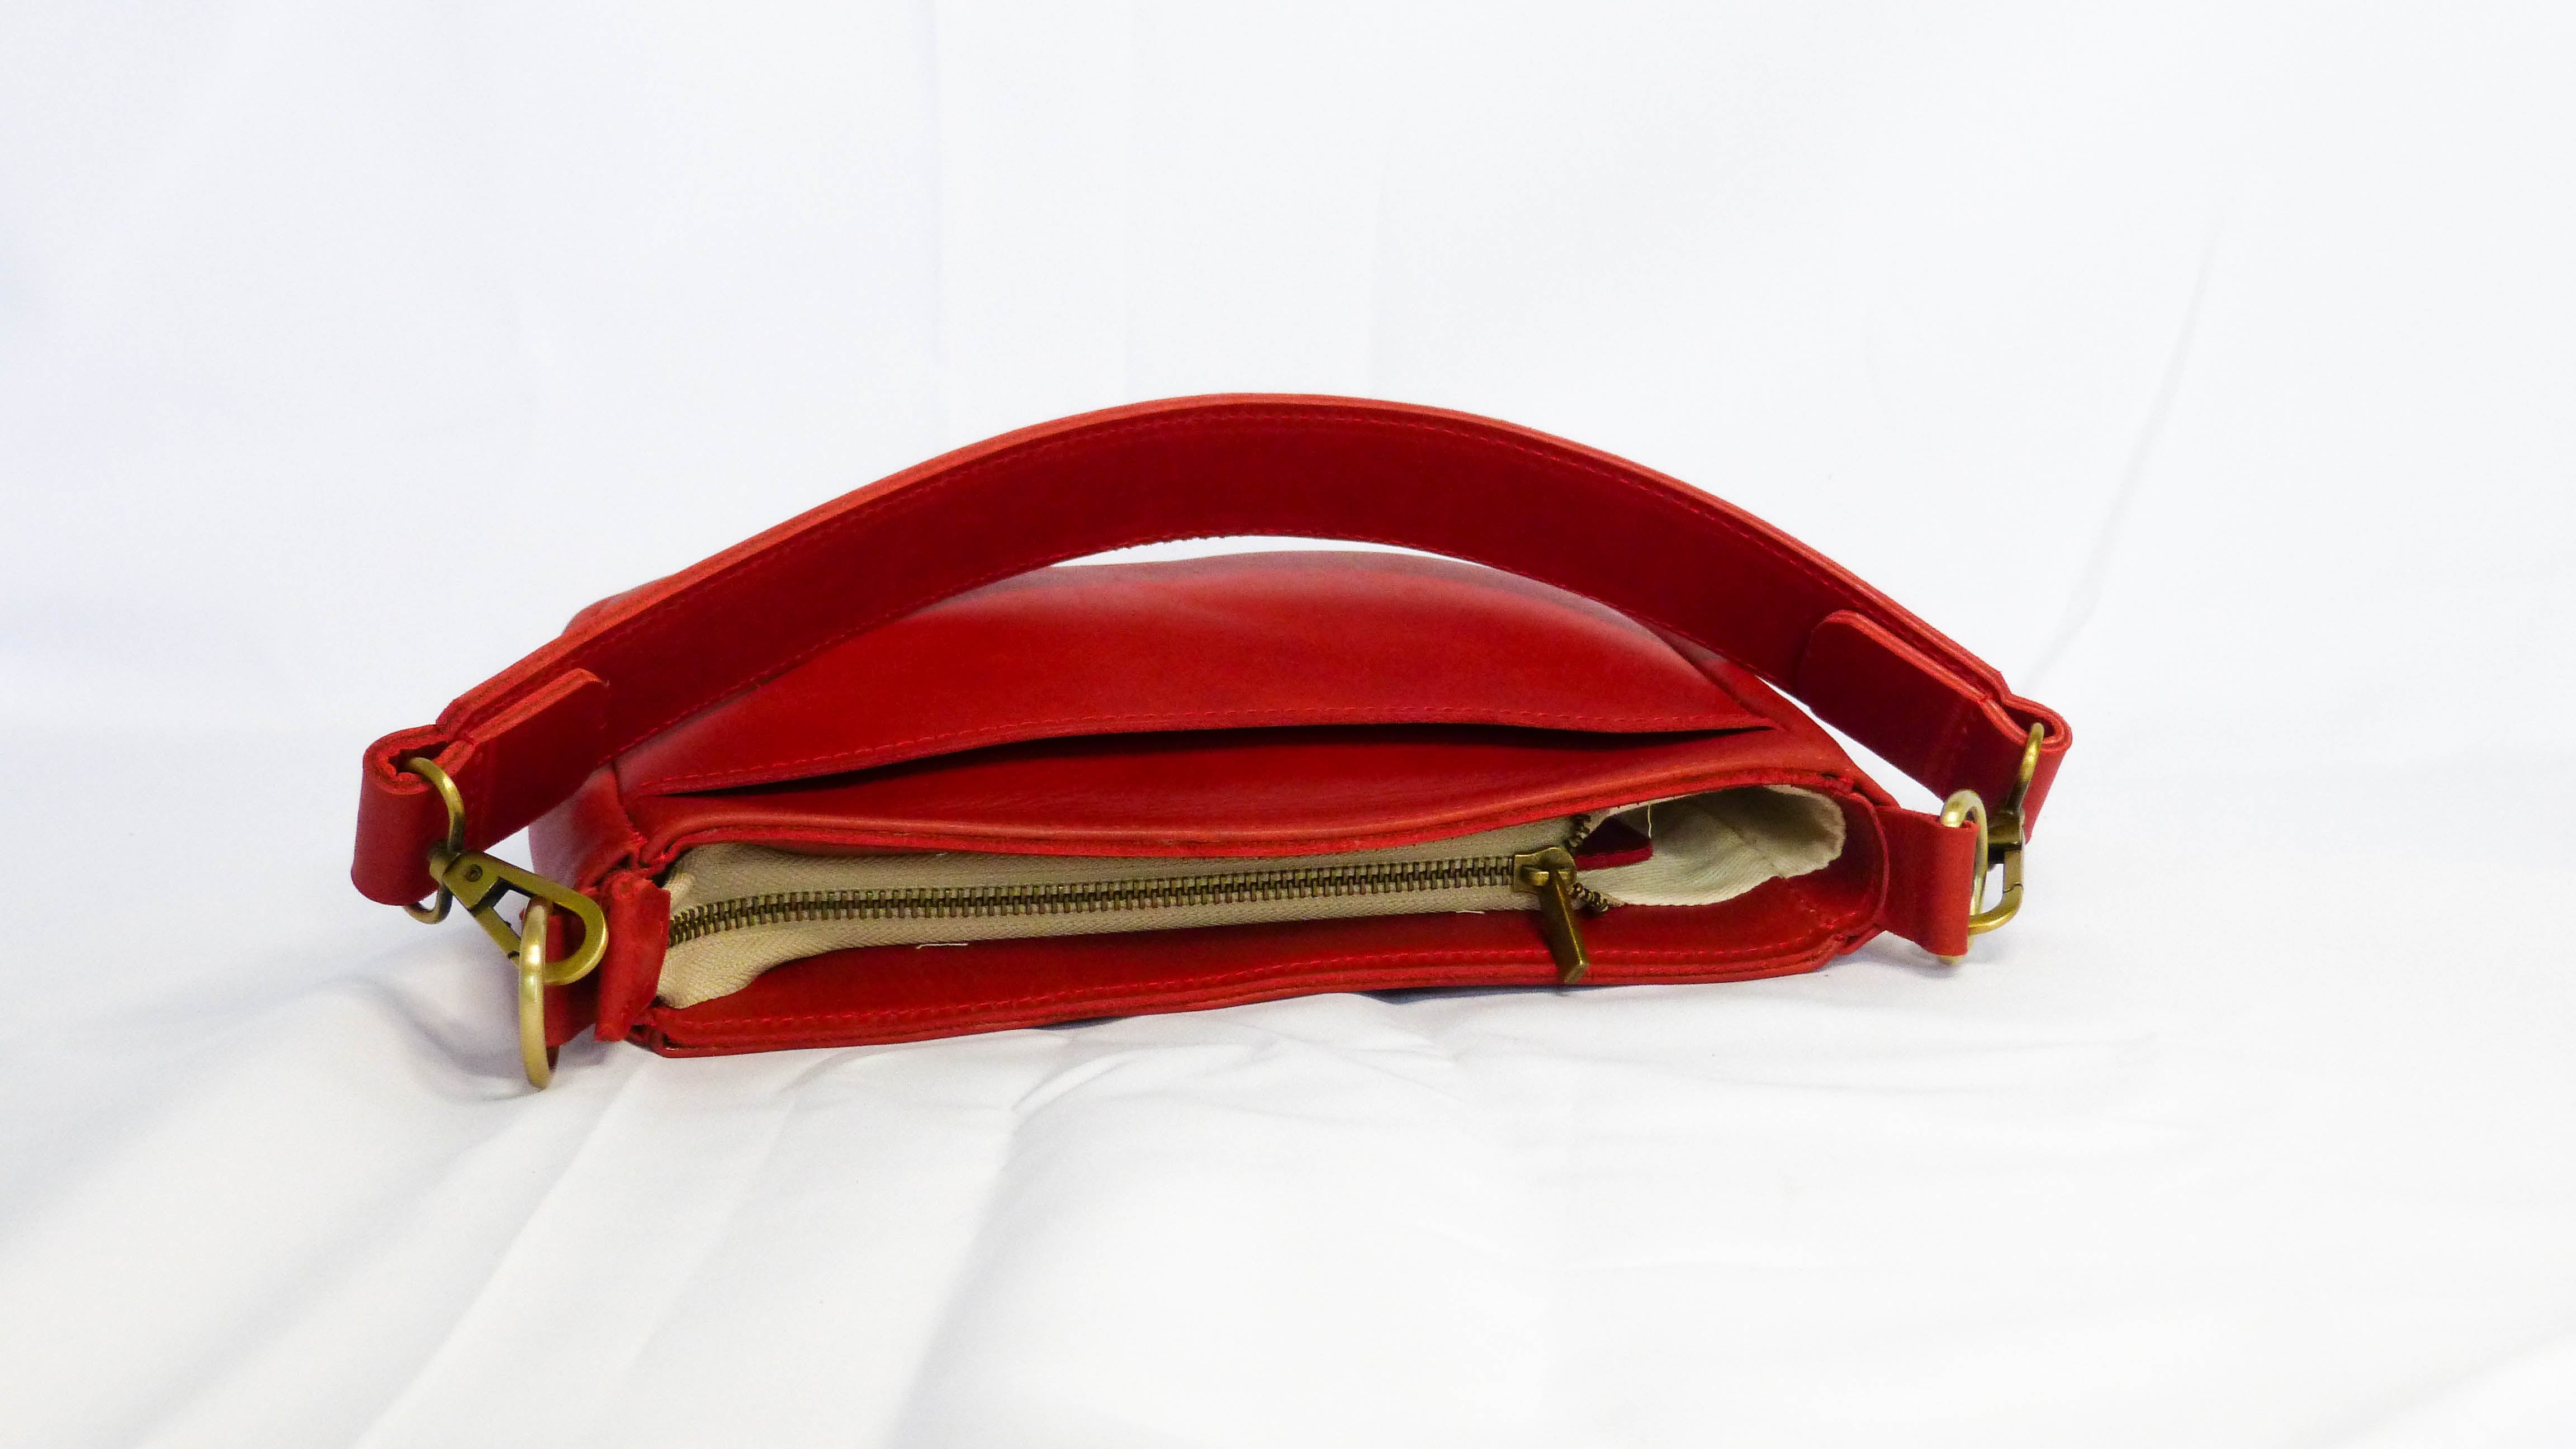 A red leather purse with a handle and zipper, showcasing craftsmanship by Ethiopian artisans. Features a zippered top, inside pocket, and removable shoulder strap. Ideal for everyday use or a night out.